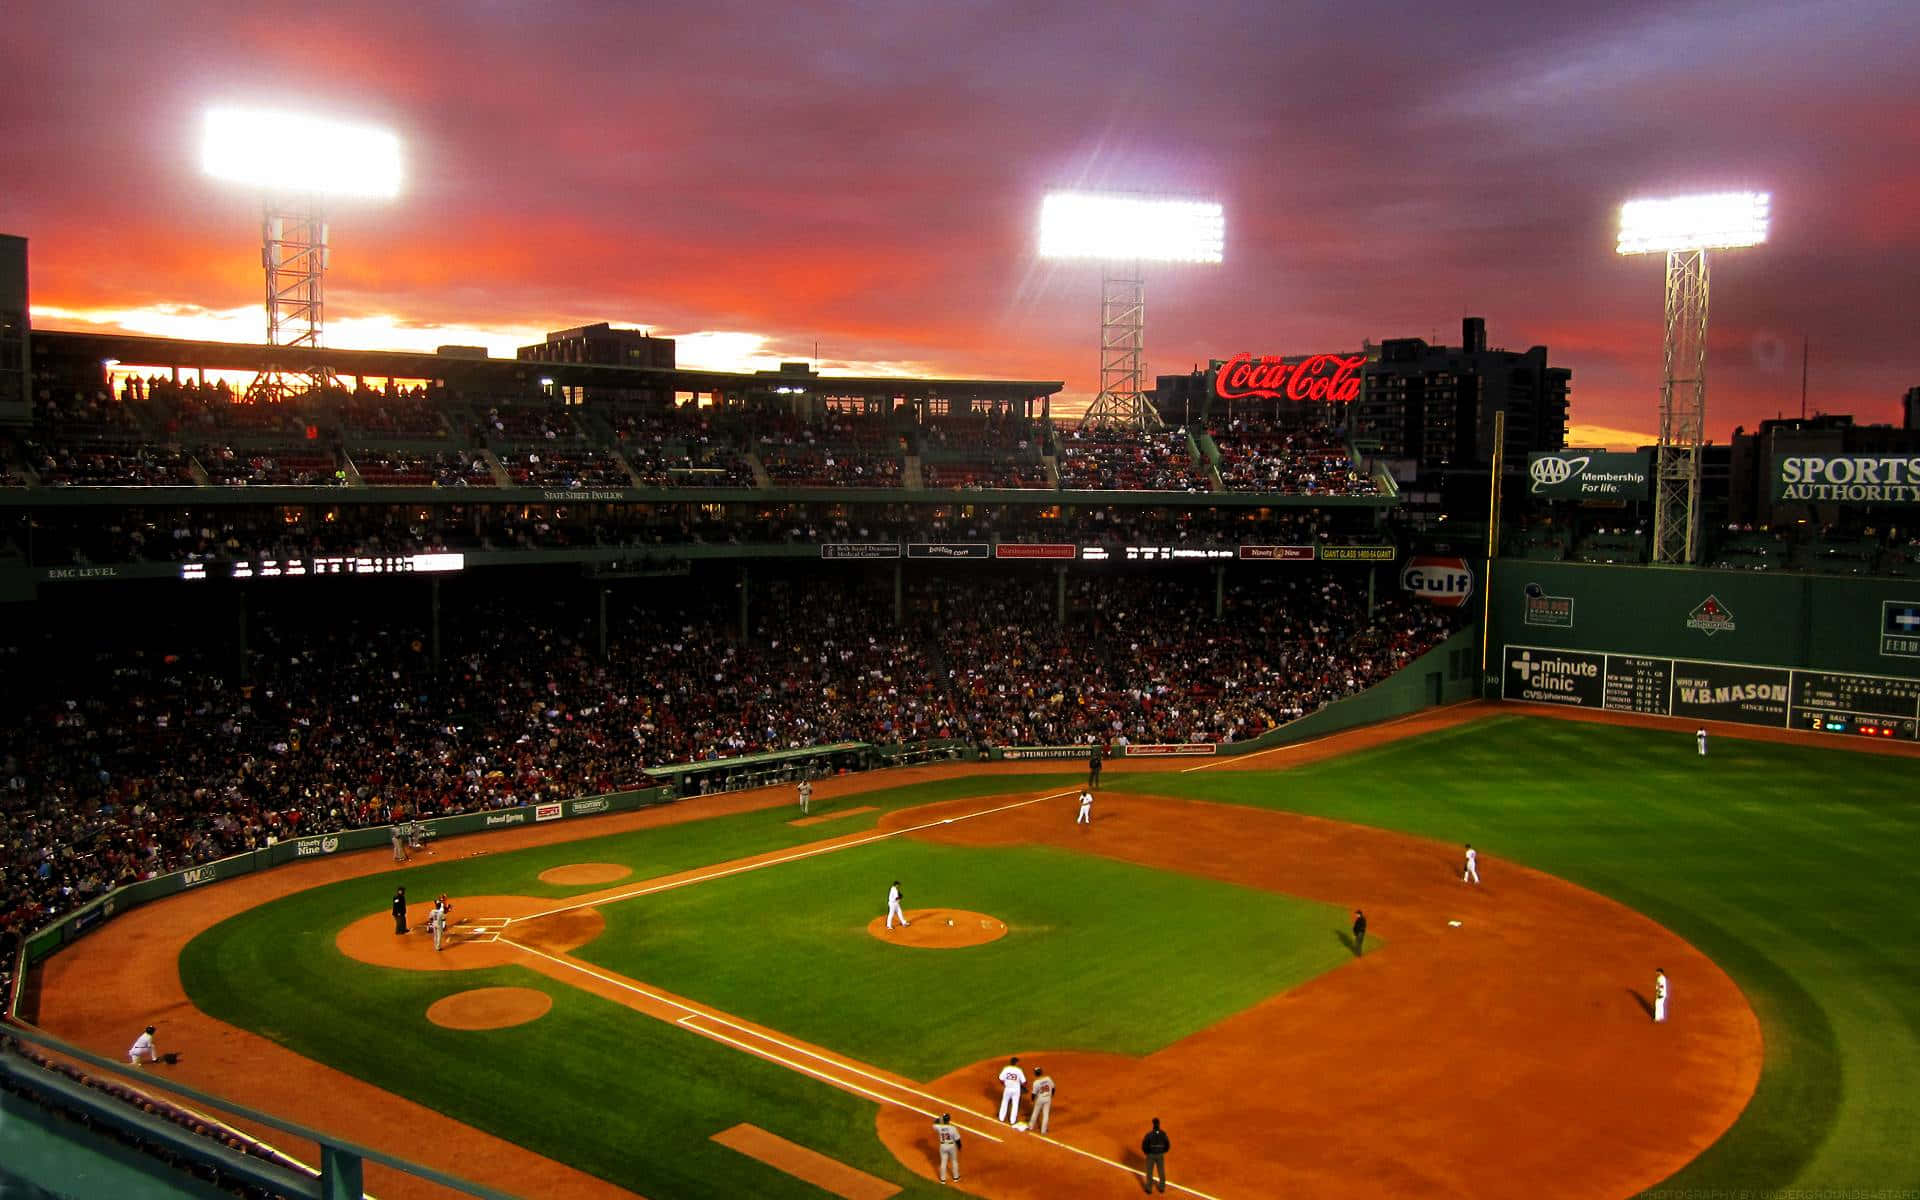 Experience the magic of Fenway Park in this unforgettable 4K image Wallpaper